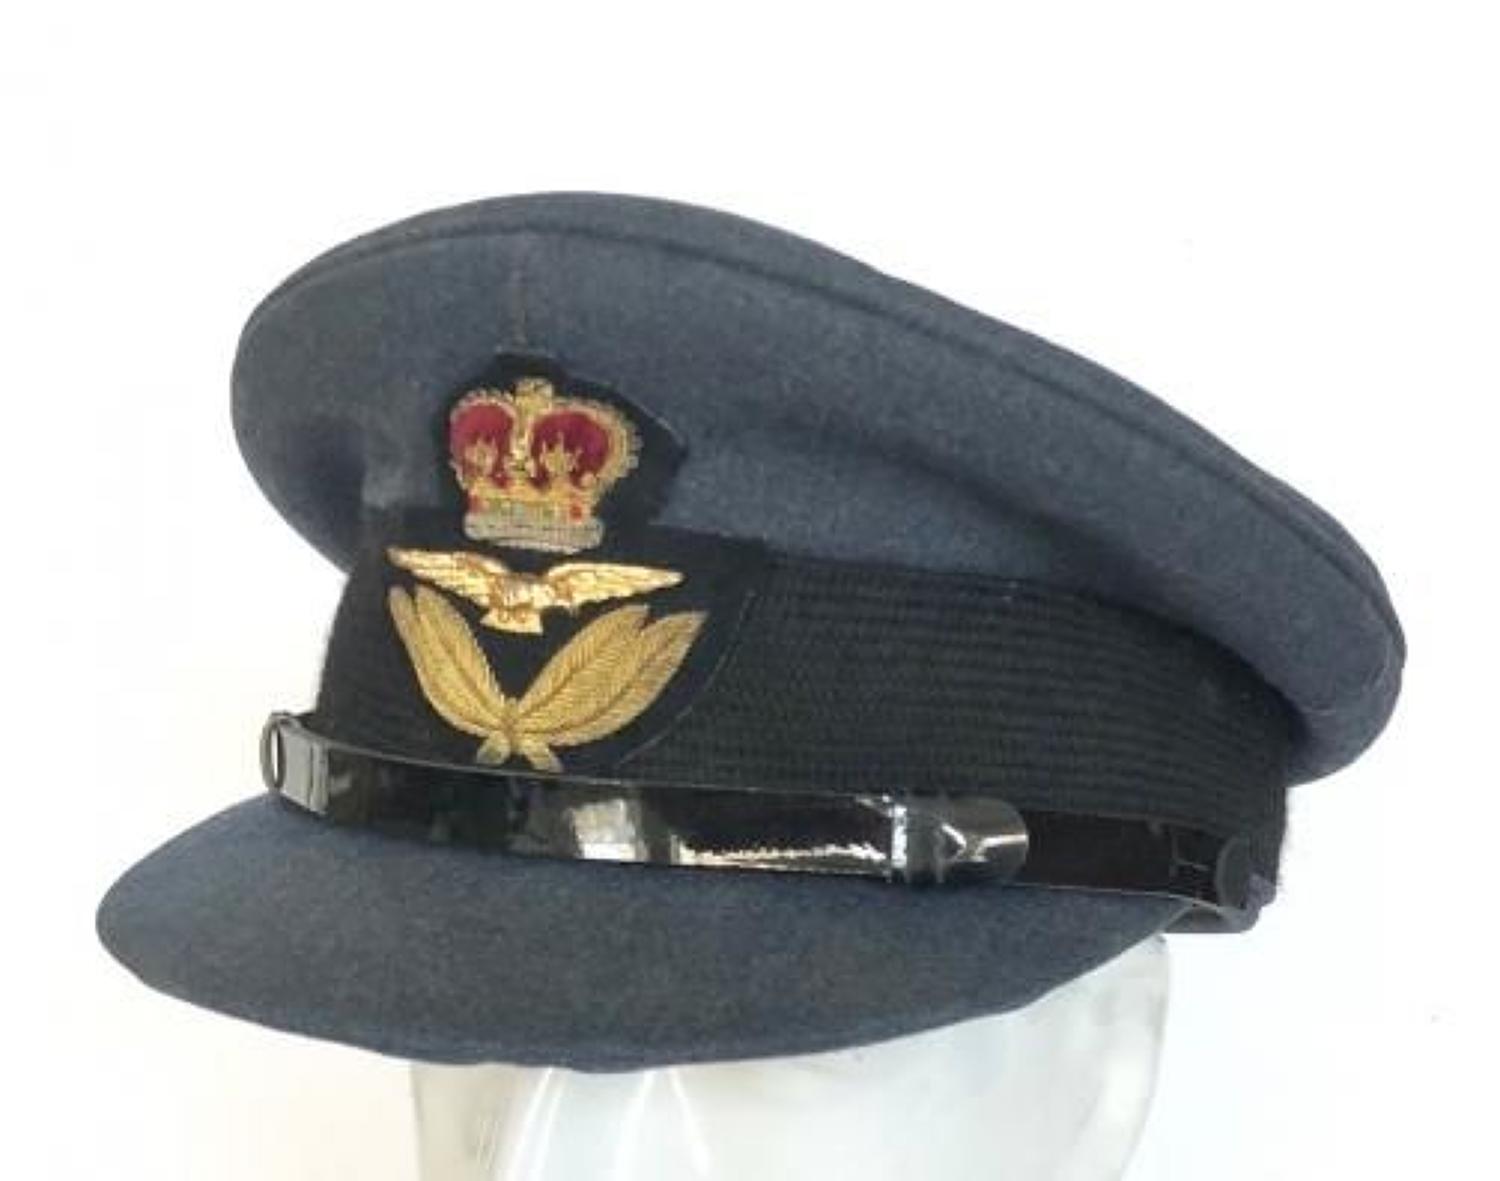 RAF Officer's Cap by Bates of London.